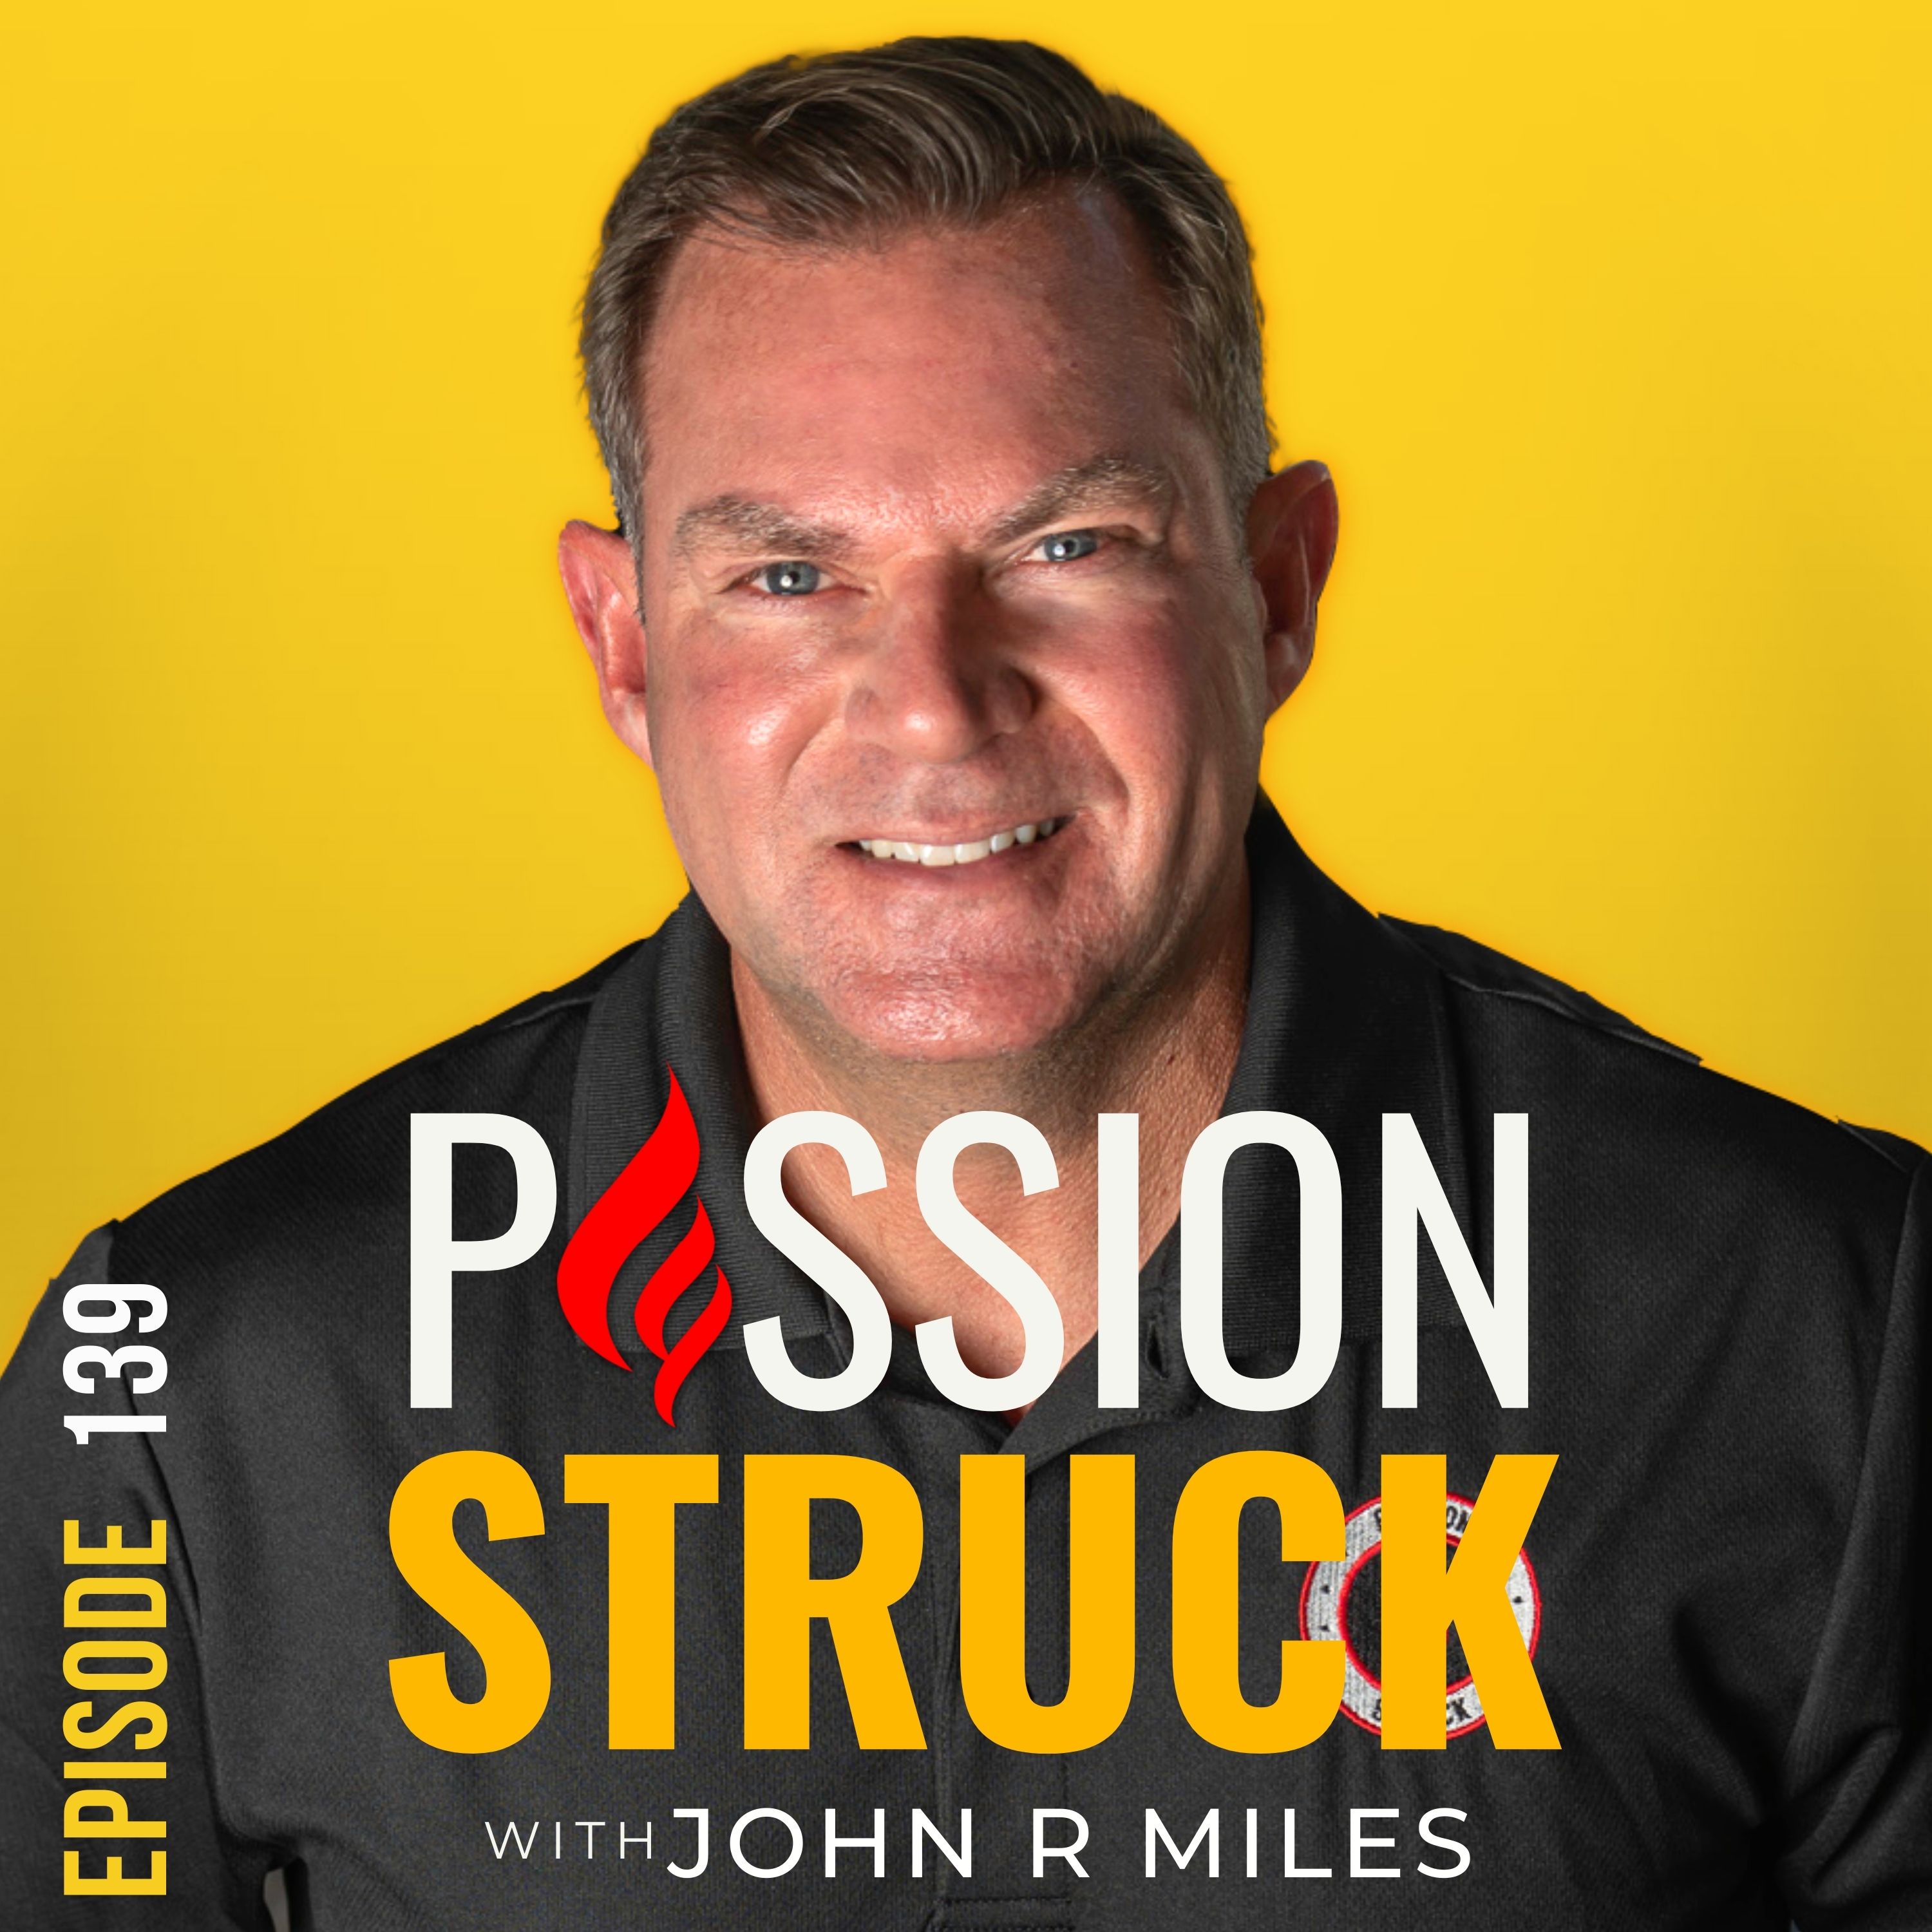 Passion Struck with John R. Miles Album Cover episode 139 on beneficial beliefs